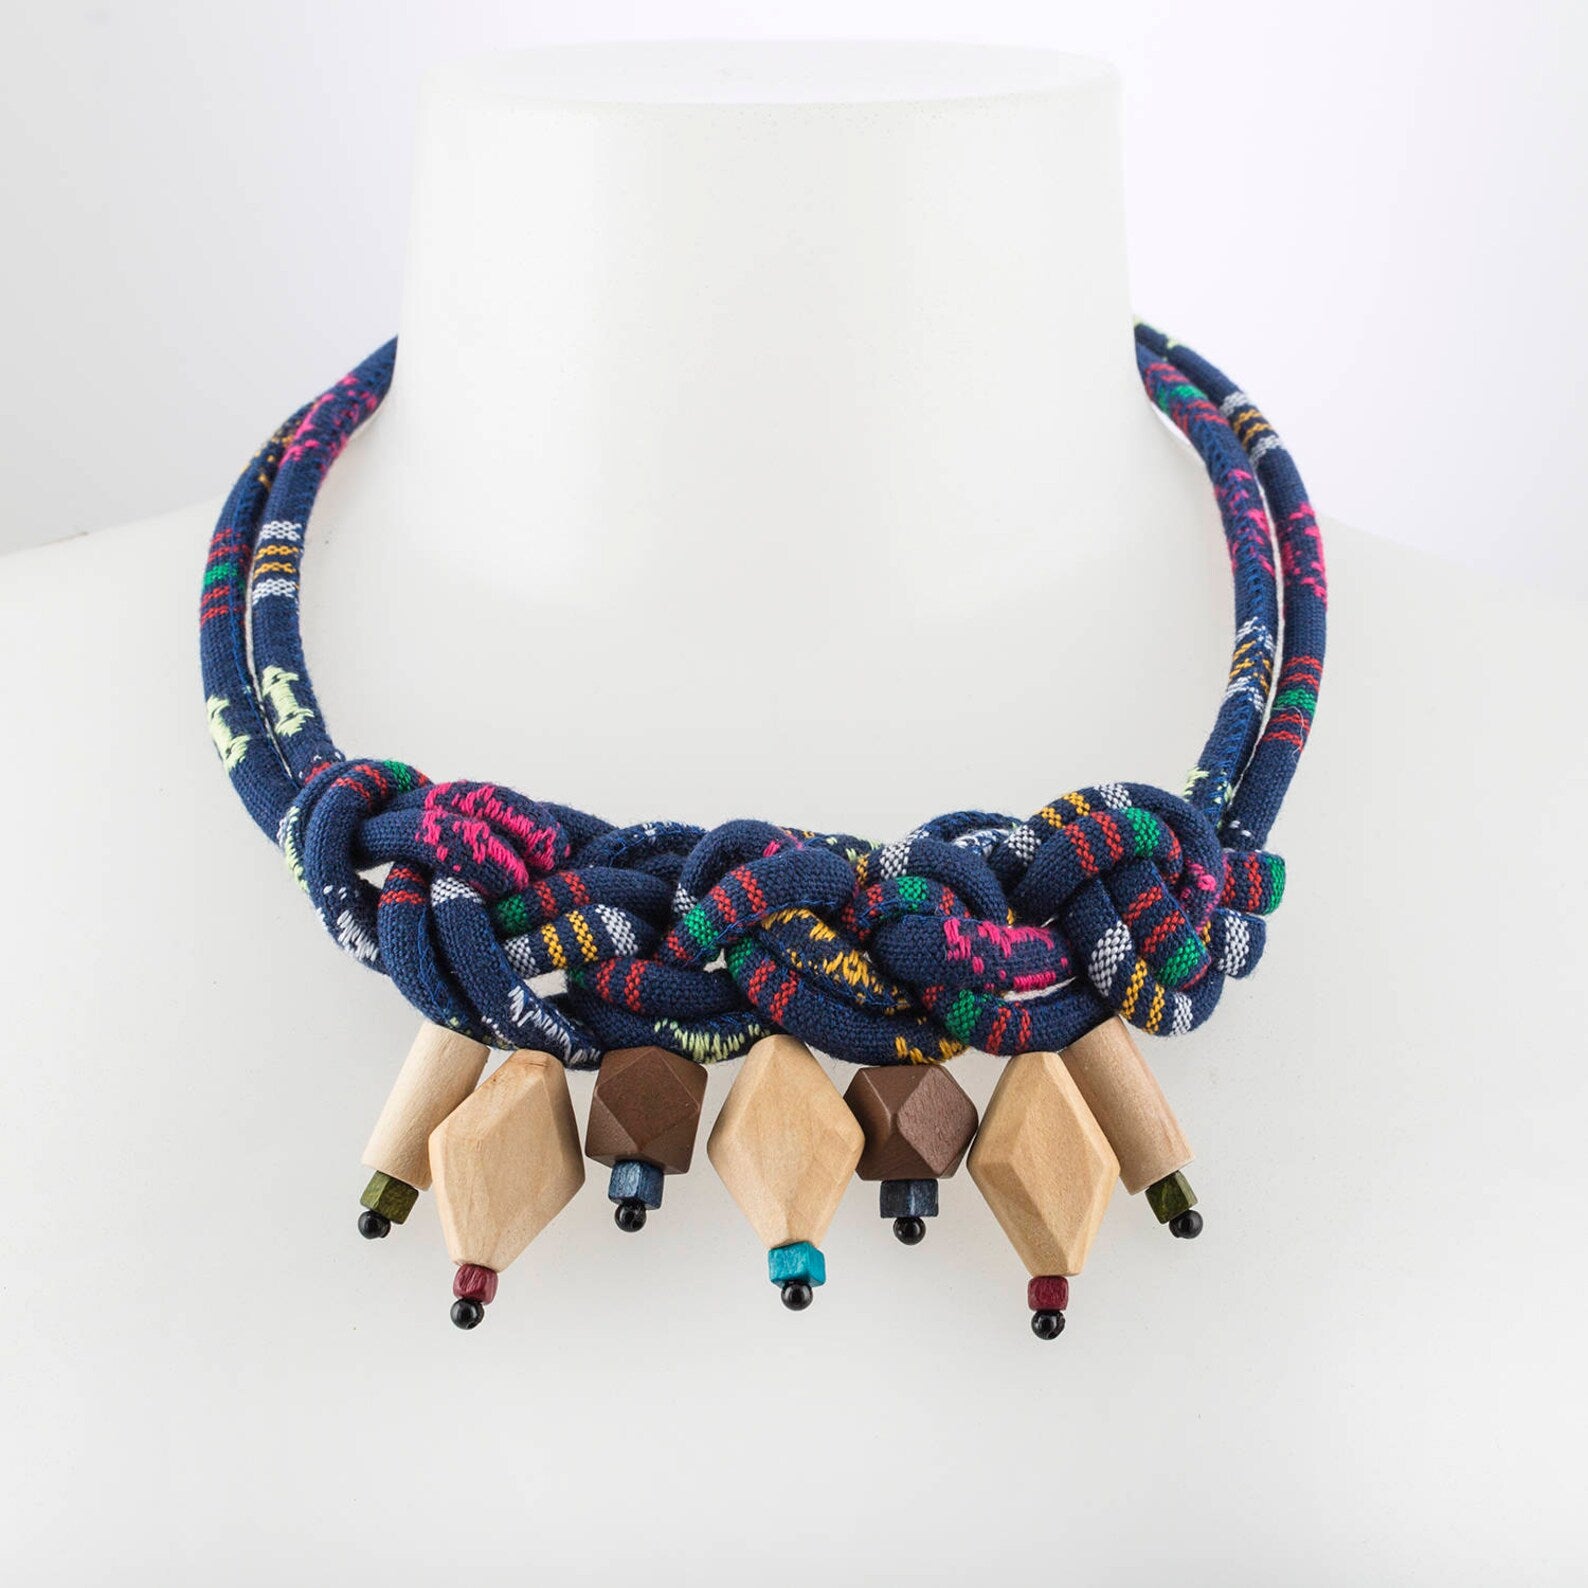 Fabric rope necklace